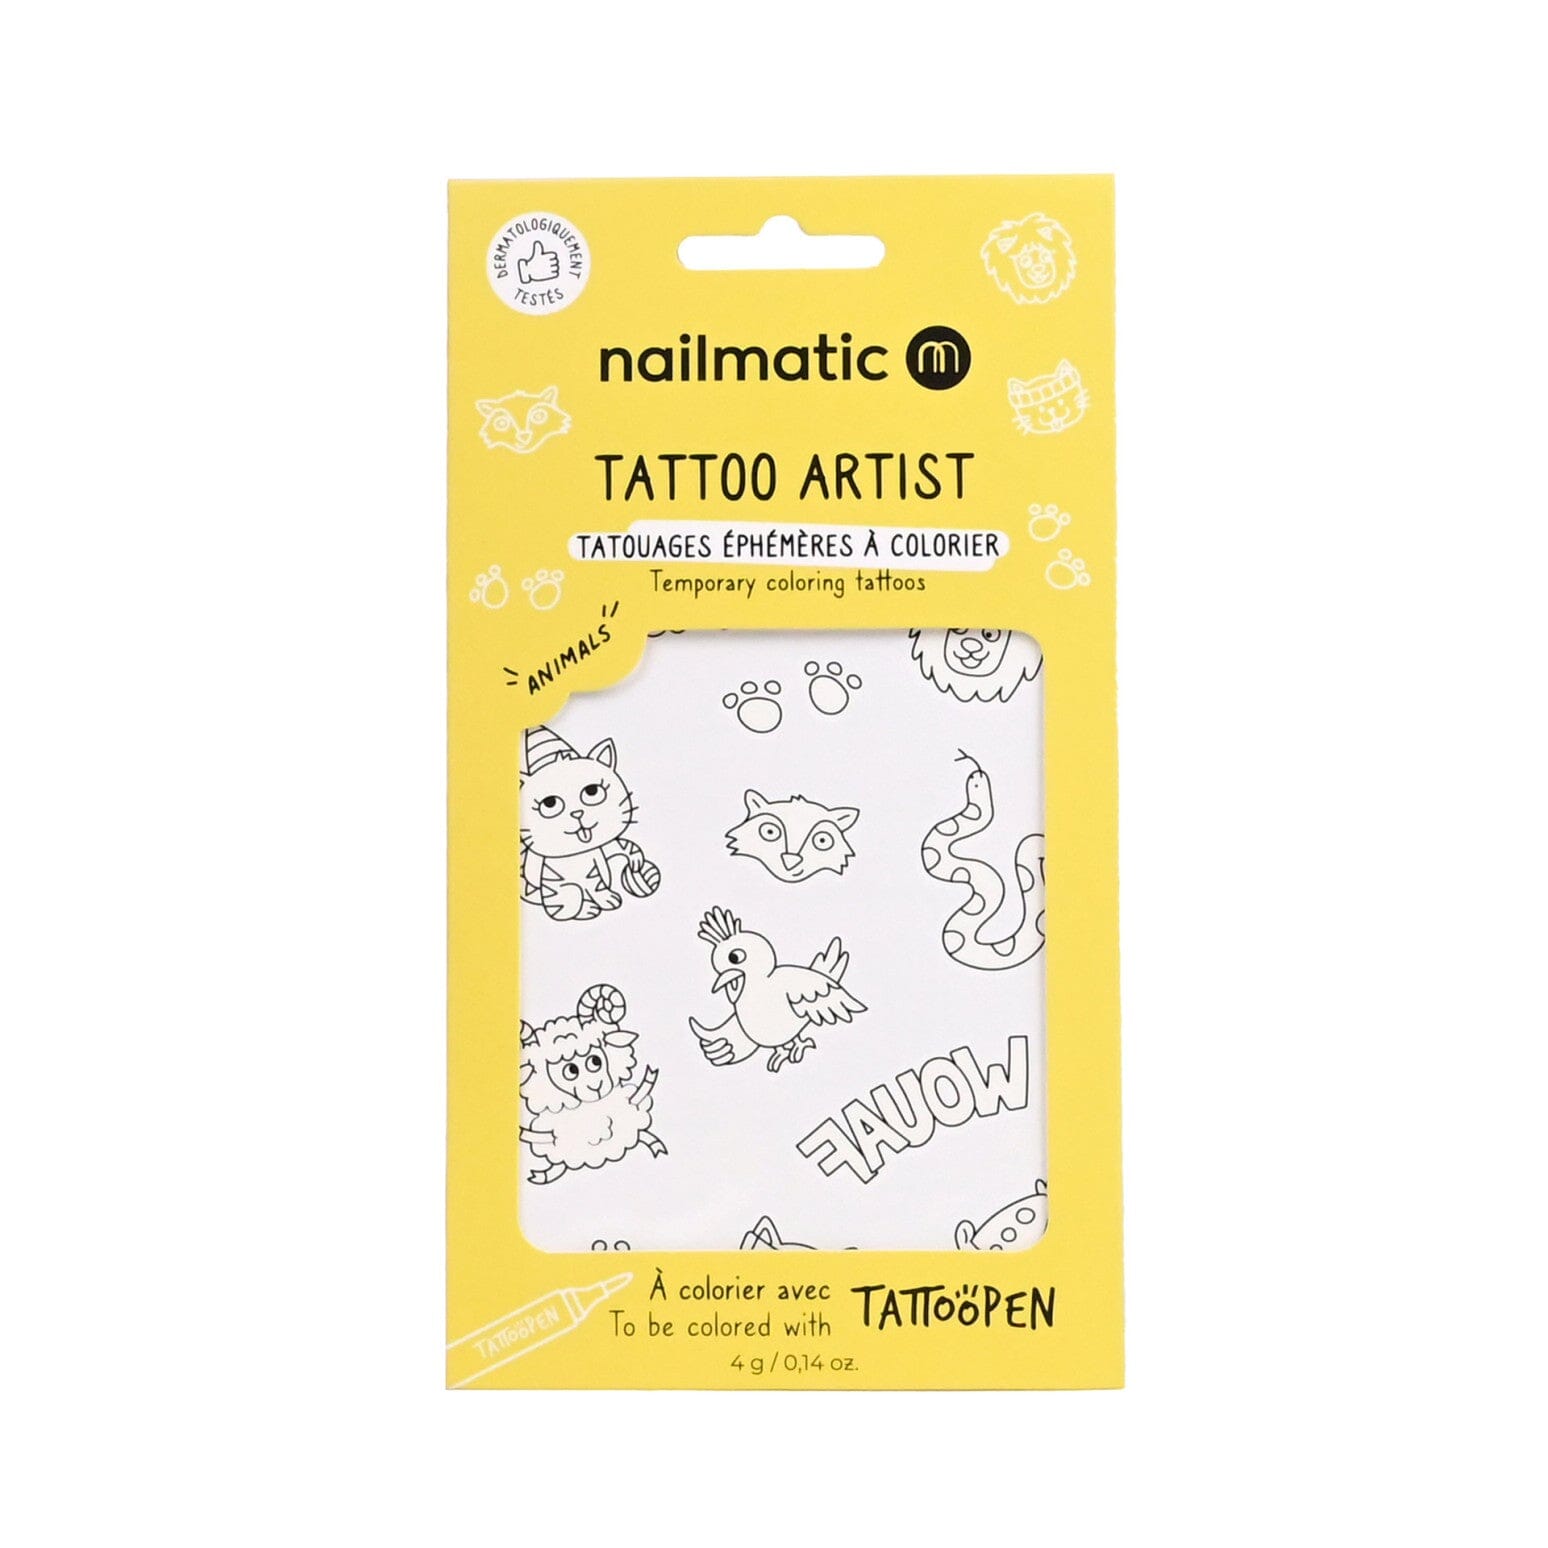 12 tatouages a colorier animaux - Nailmatic 150TANIMALS 3760229899379